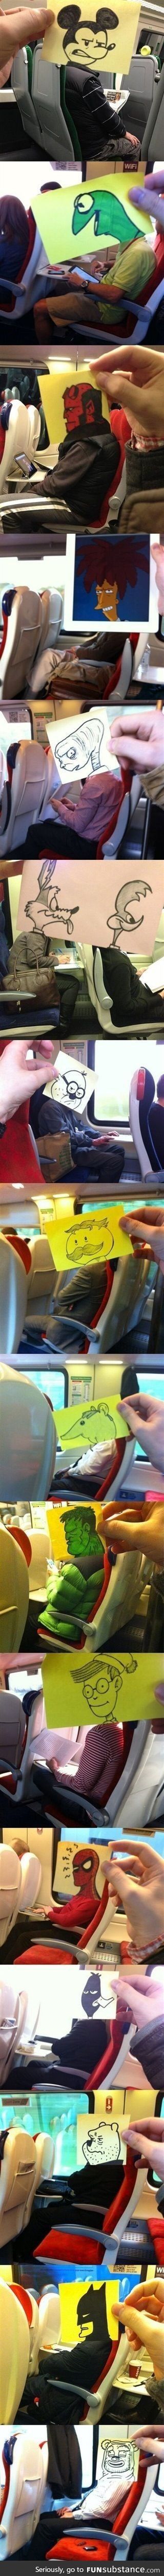 Another use for post-it notes